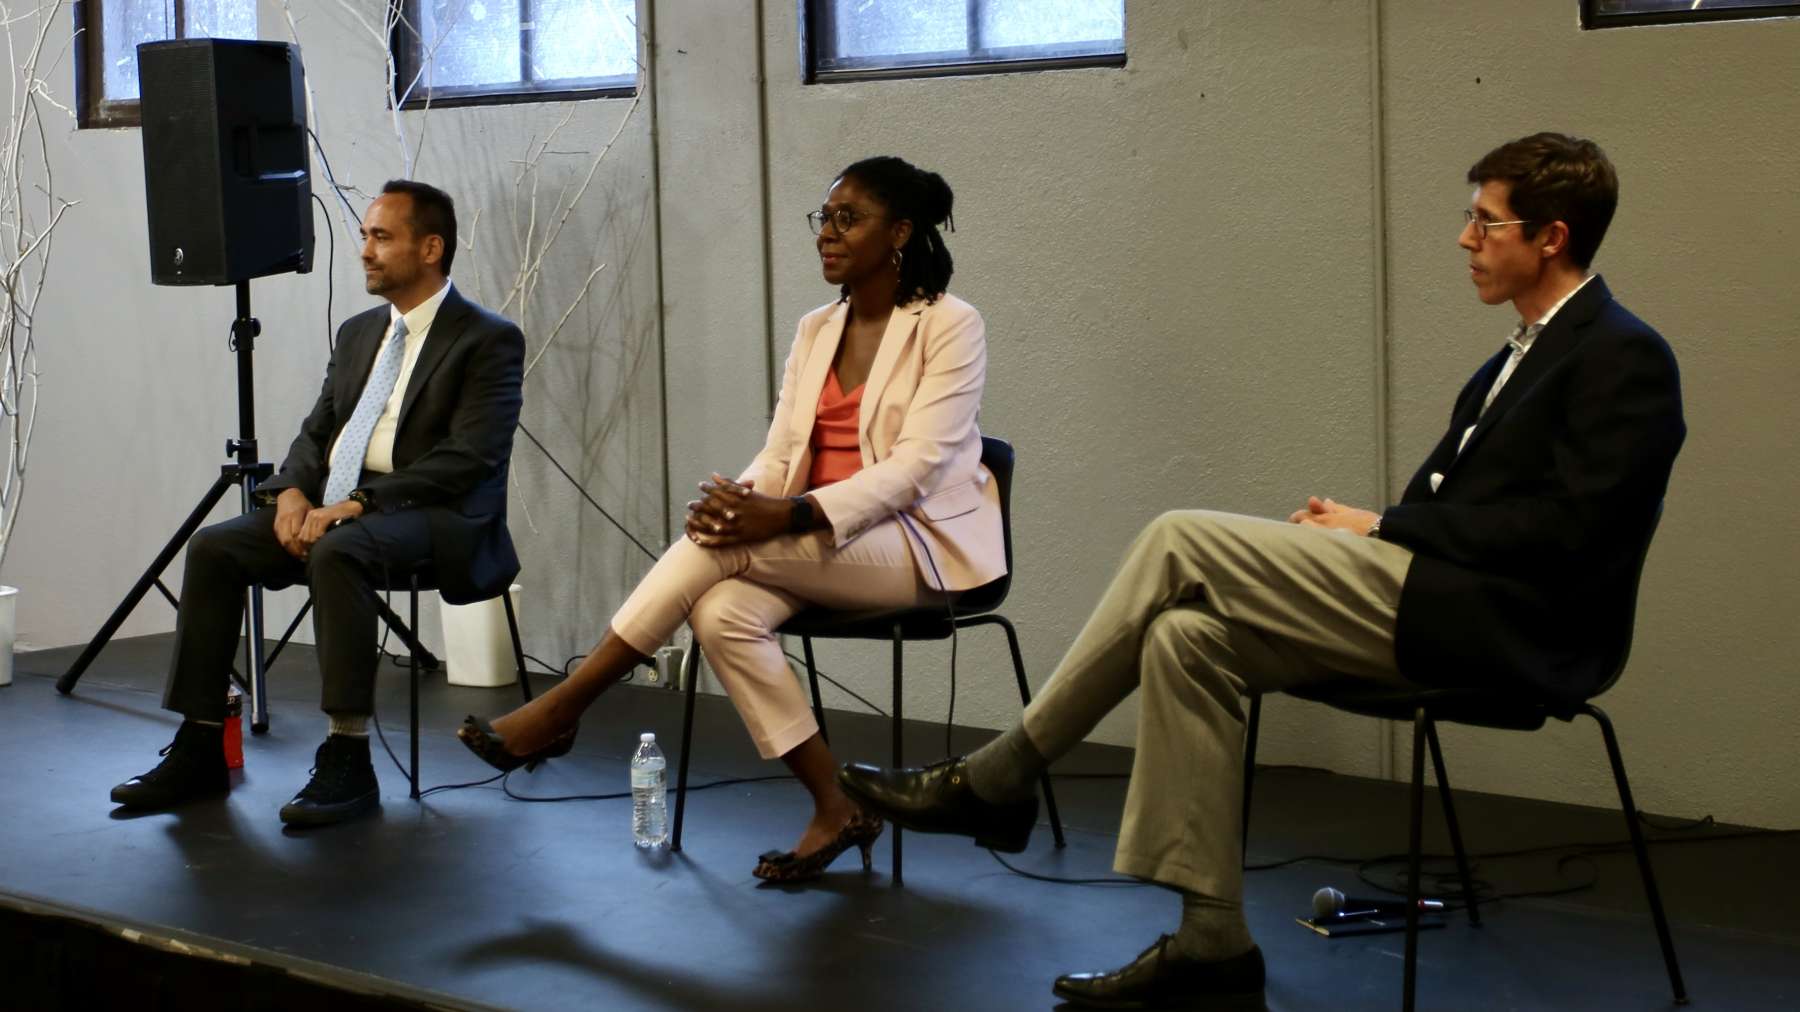 Rhode Island News: Providence mayoral candidates make their case to voters at southside forum